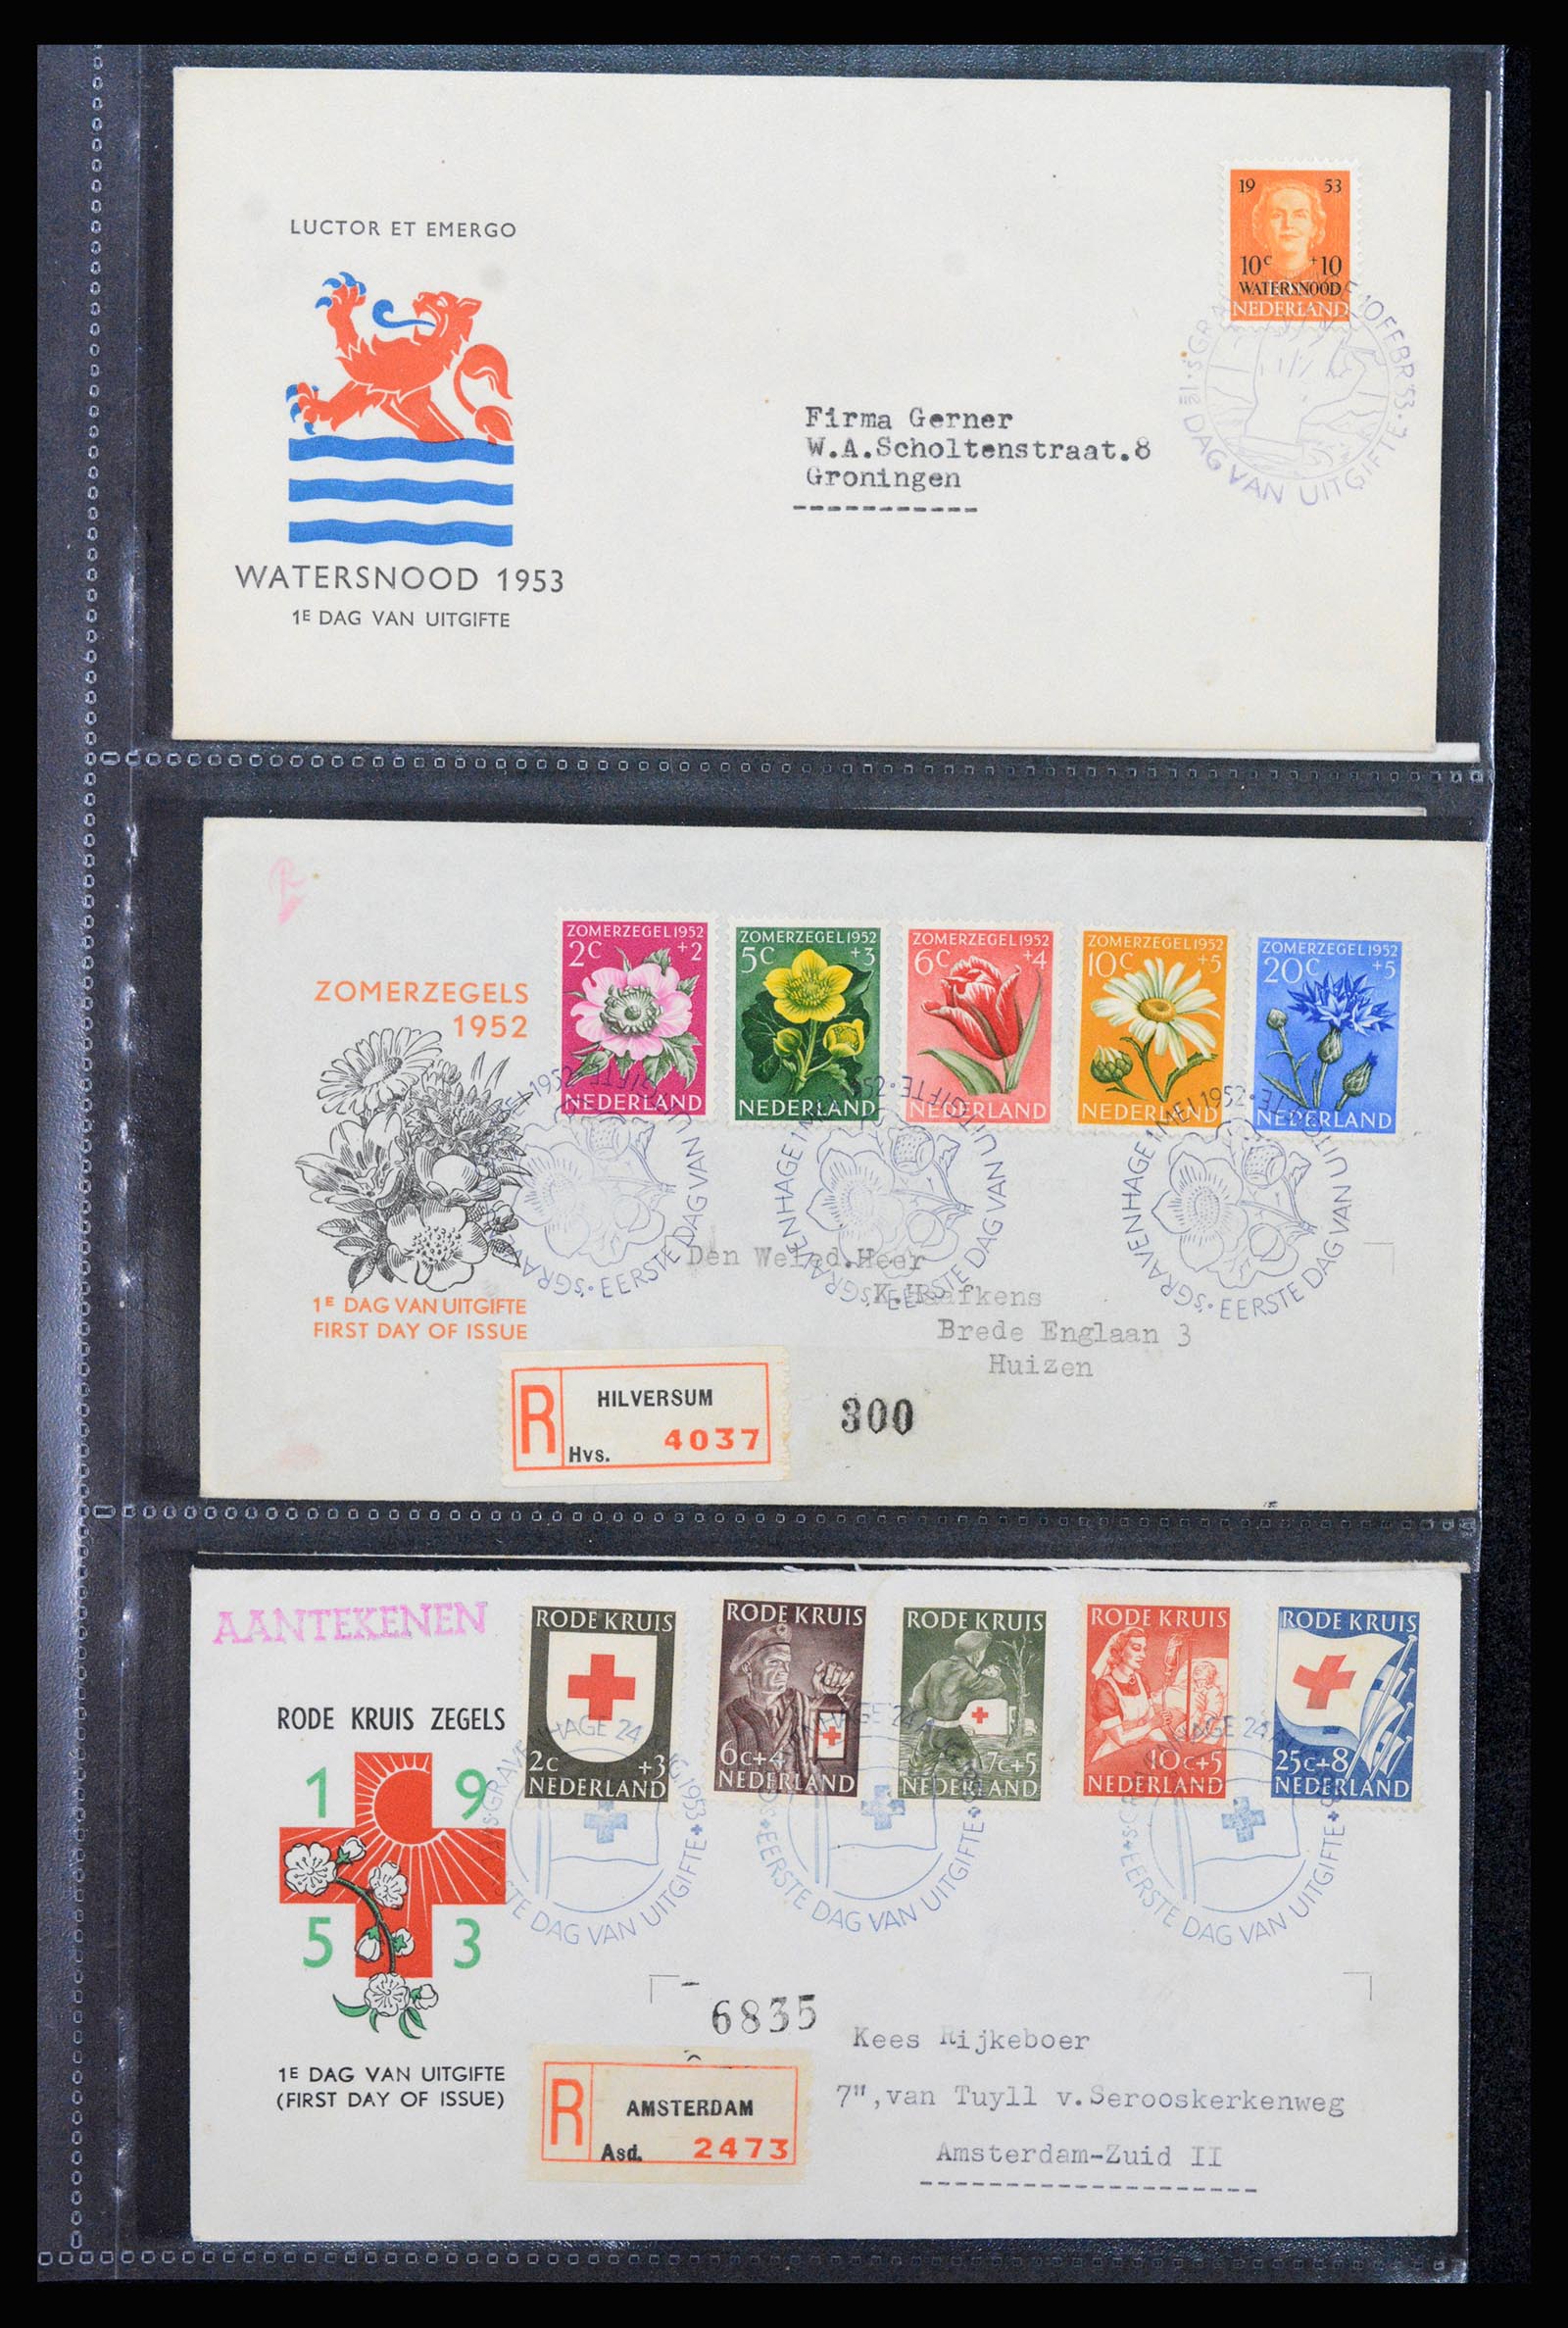 37264 005 - Stamp collection 37264 Netherlands FDC's 1950-1975.